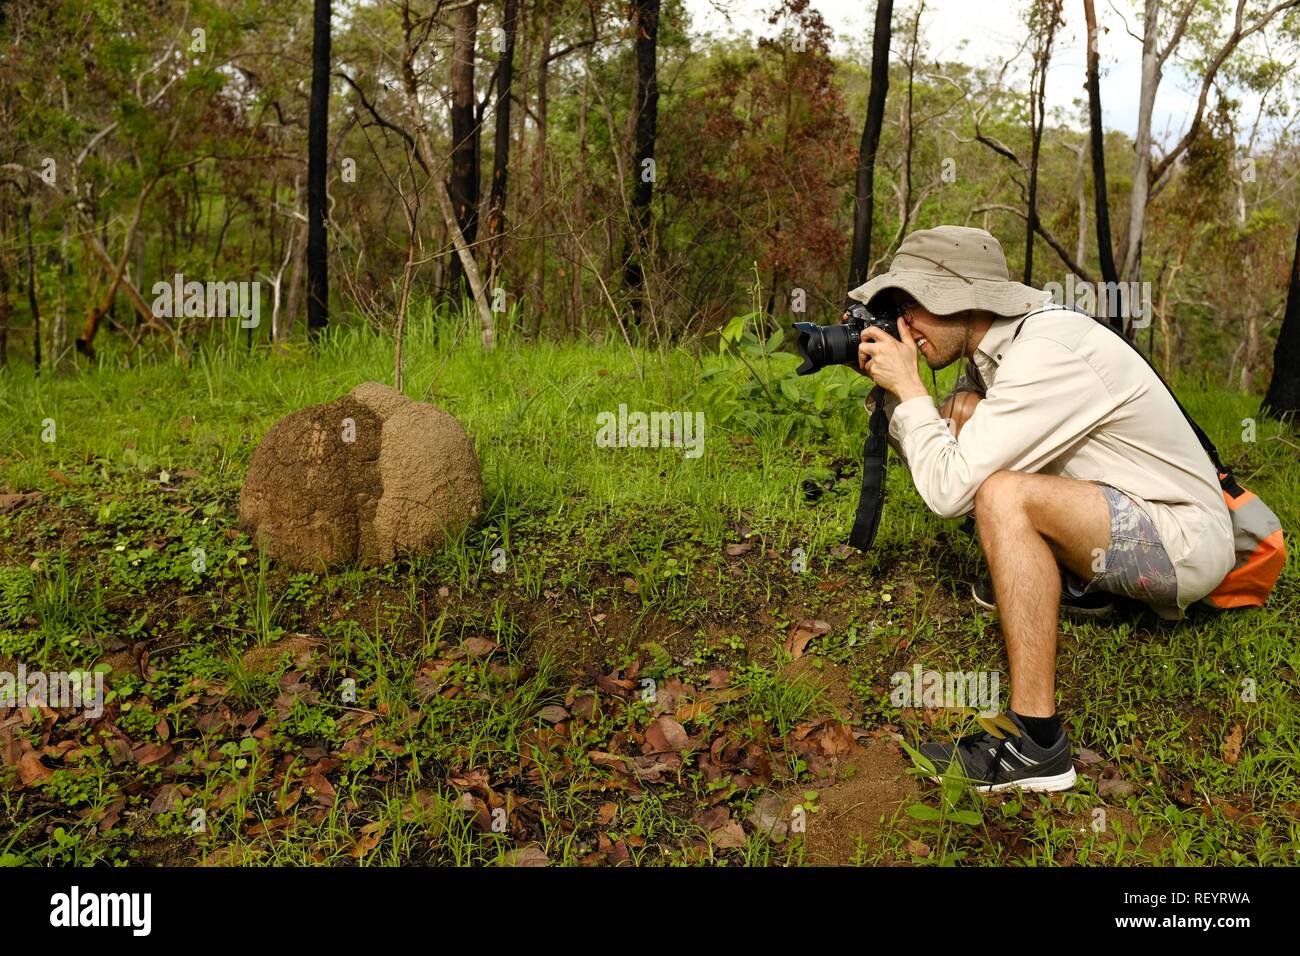 An awesomely good looking man taking a photograph of a termite hill in nature, Mia Mia State Forest, Queensland, Australia Stock Photo